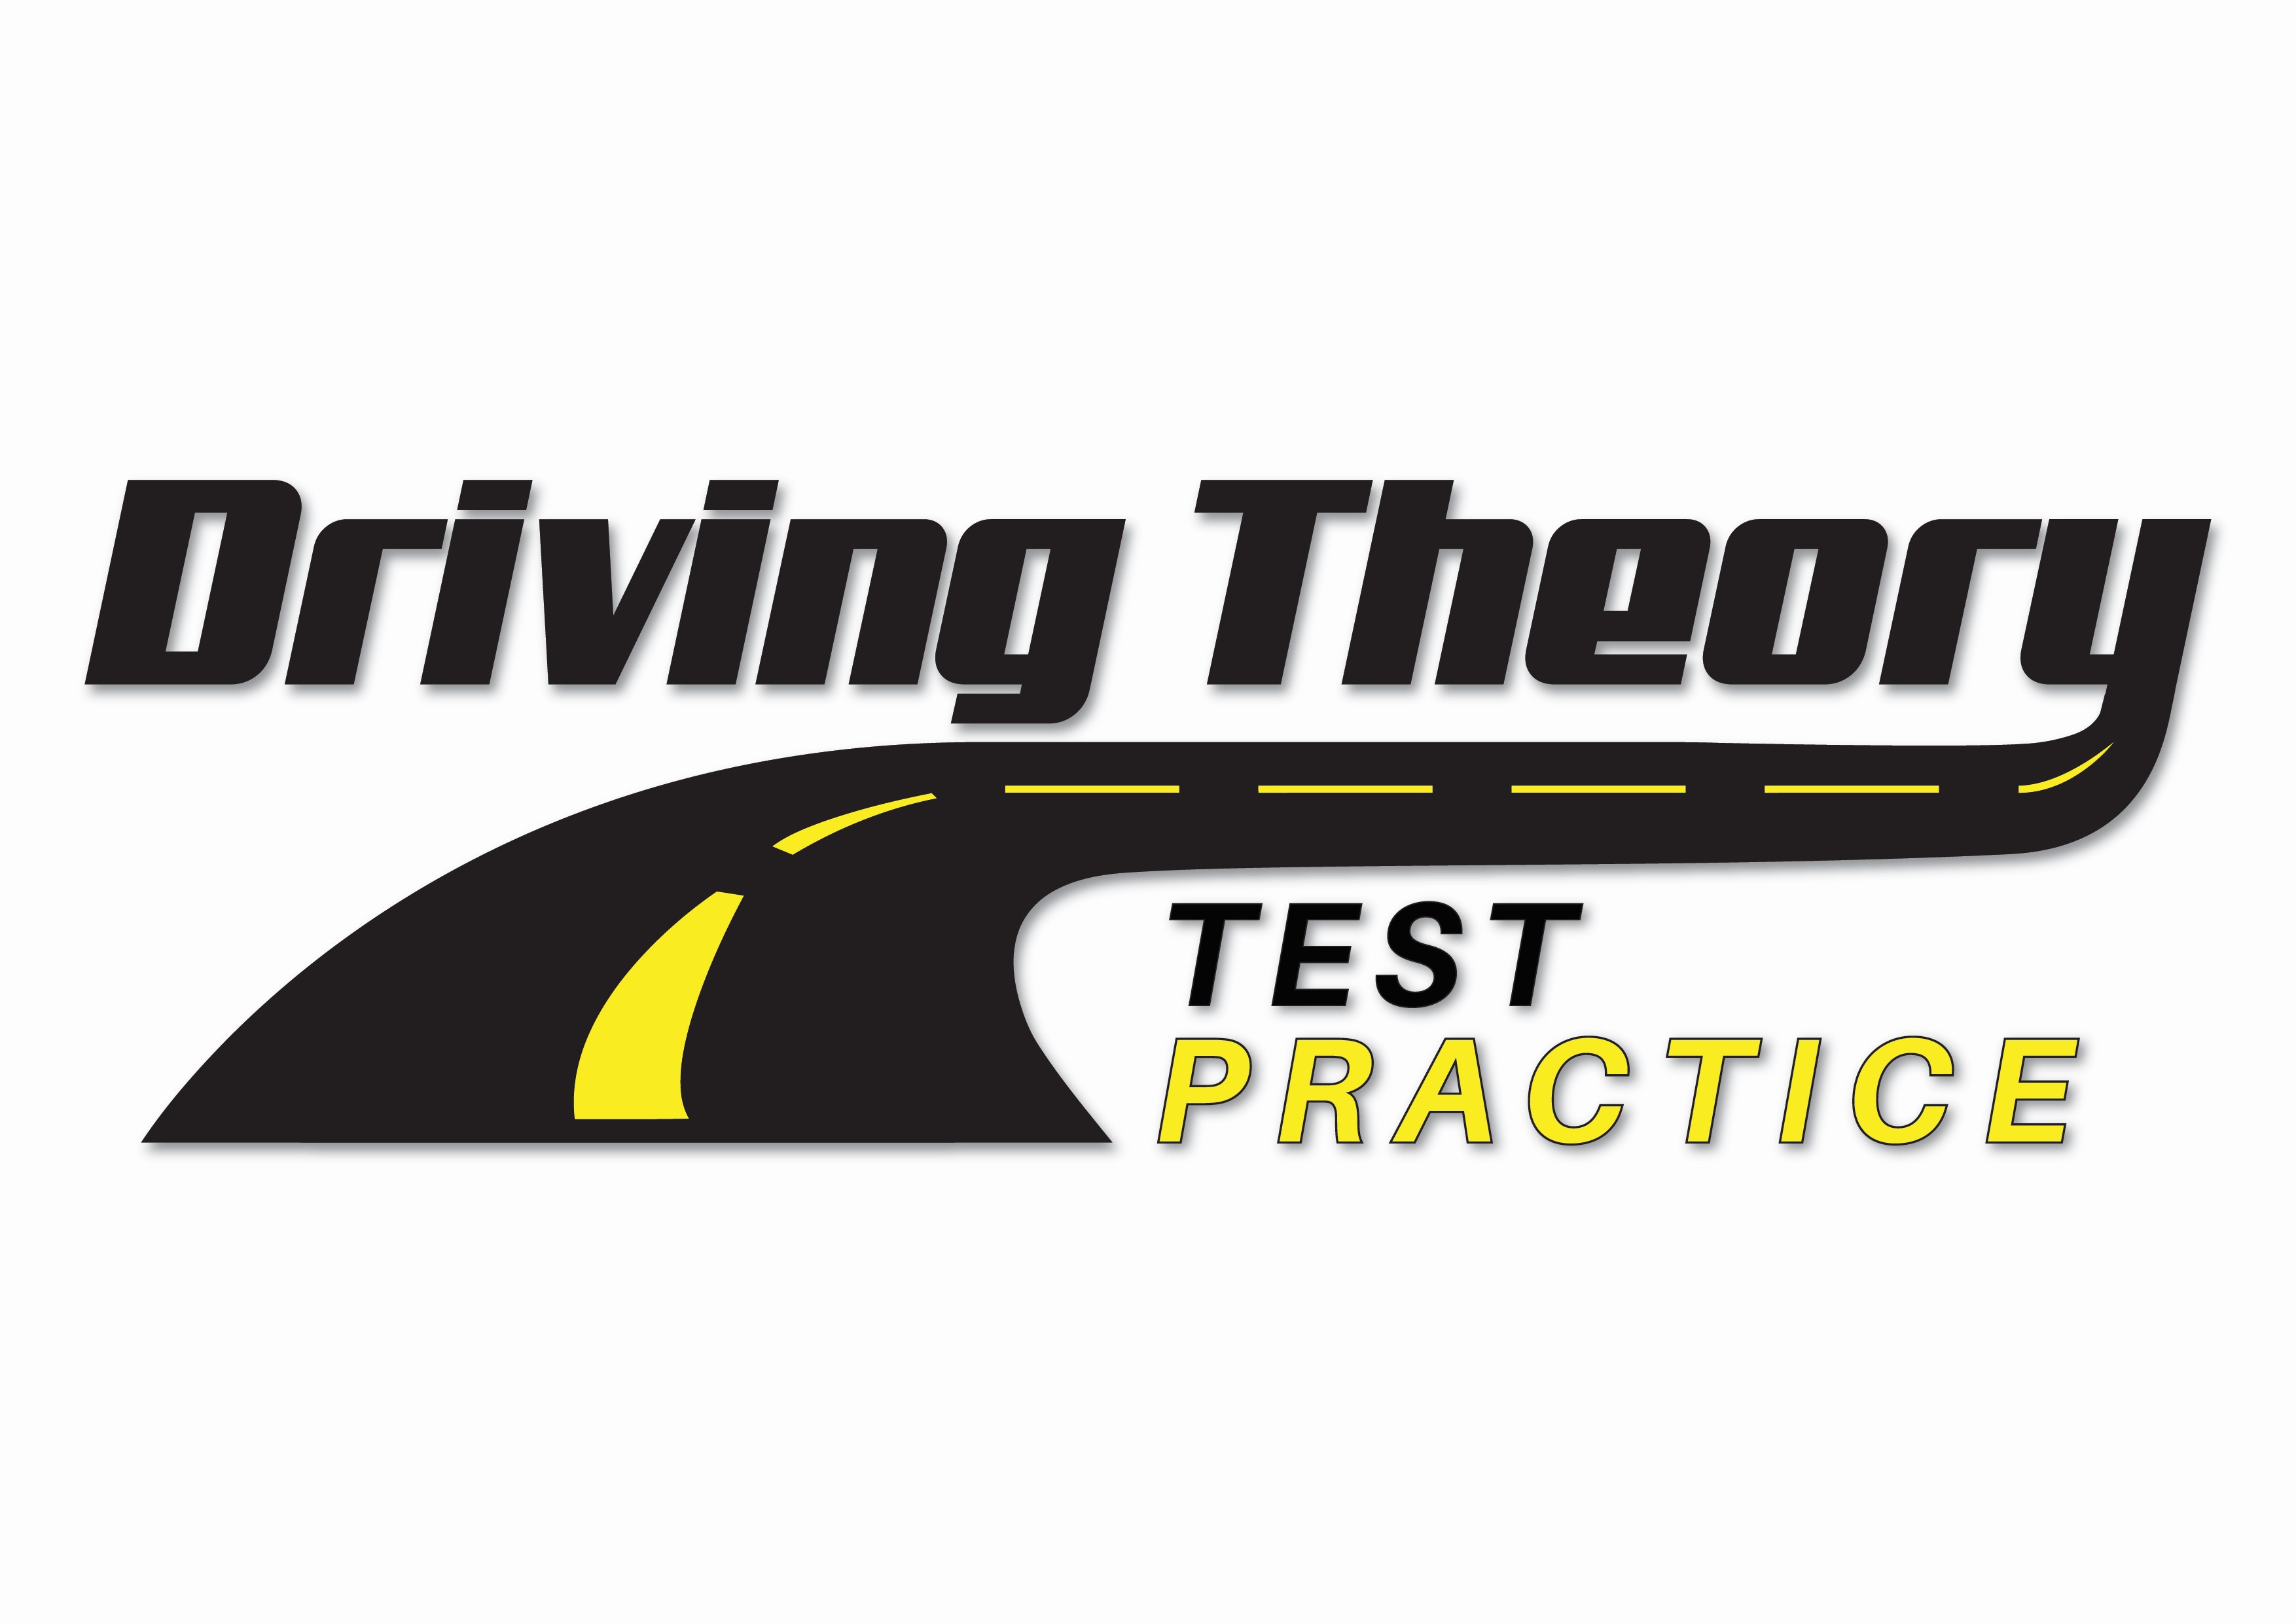 Driving Theory test practice